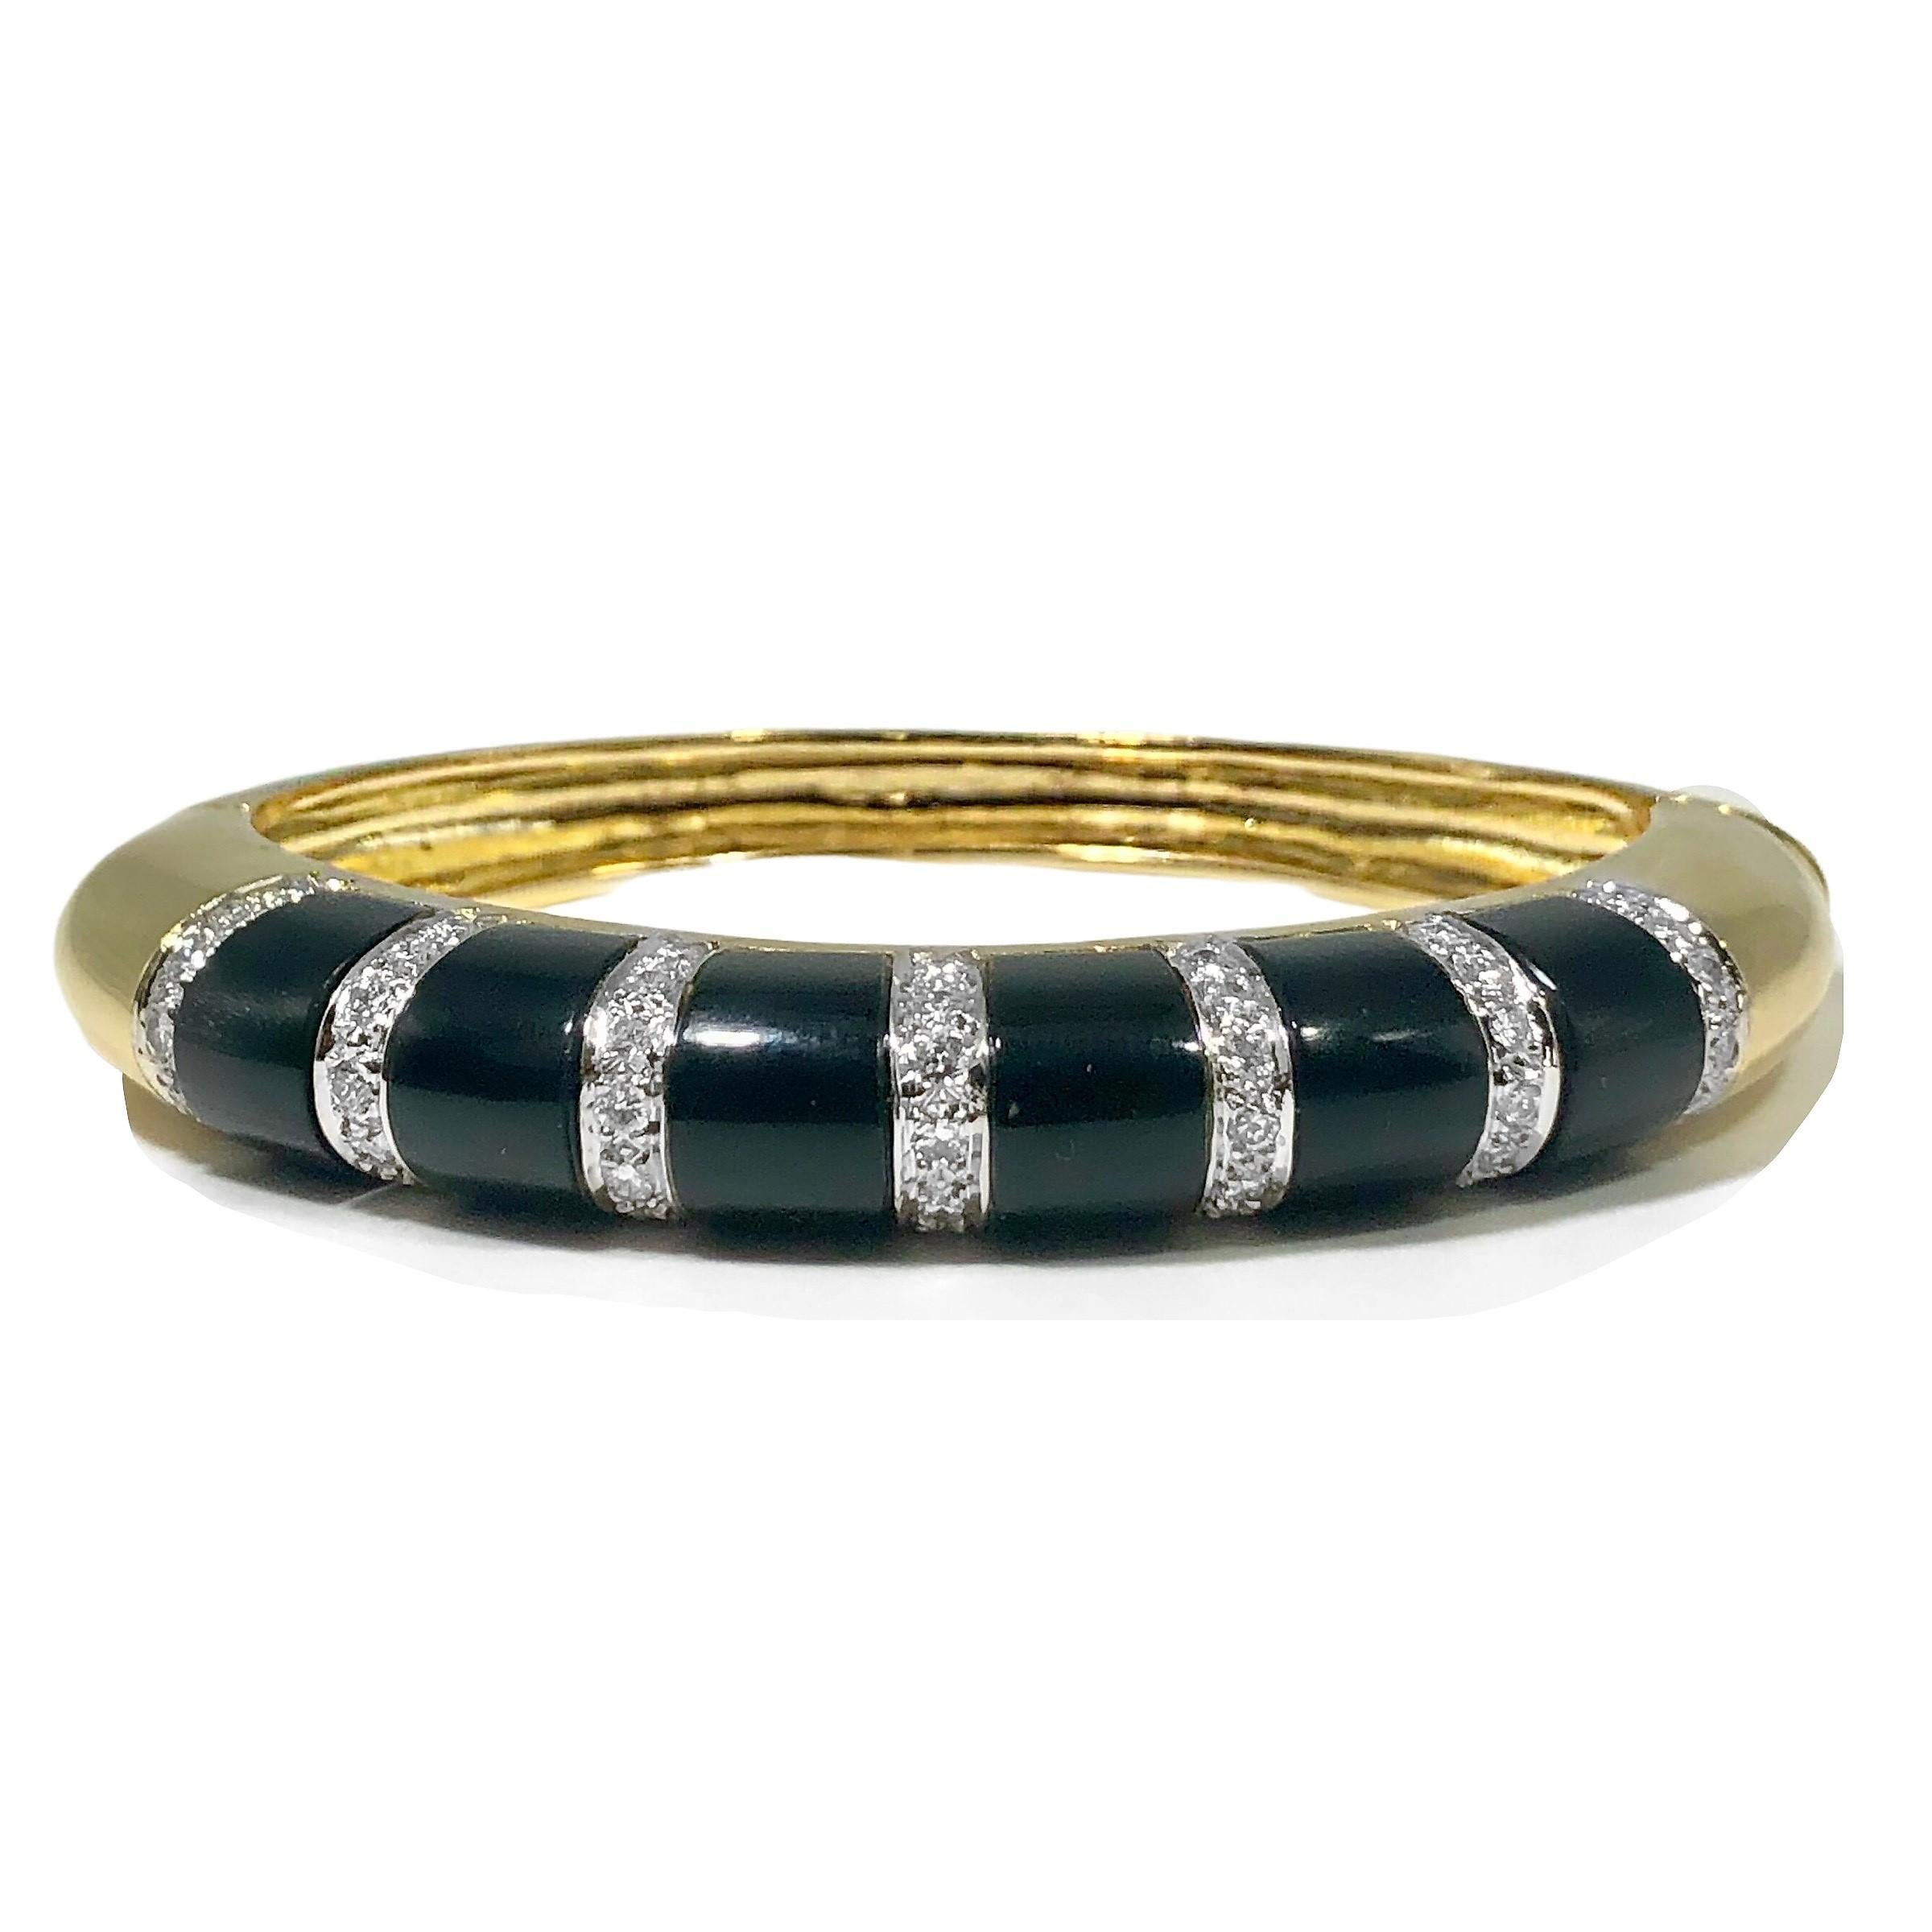 This iconic hinged bangle bracelet fabricated from 18K yellow gold, black onyx and diamonds, screams 1970's design. The bracelet was crafted with the finest quality materials and workmanship. Total approximate diamond weight is 1.25ct of overall G/H